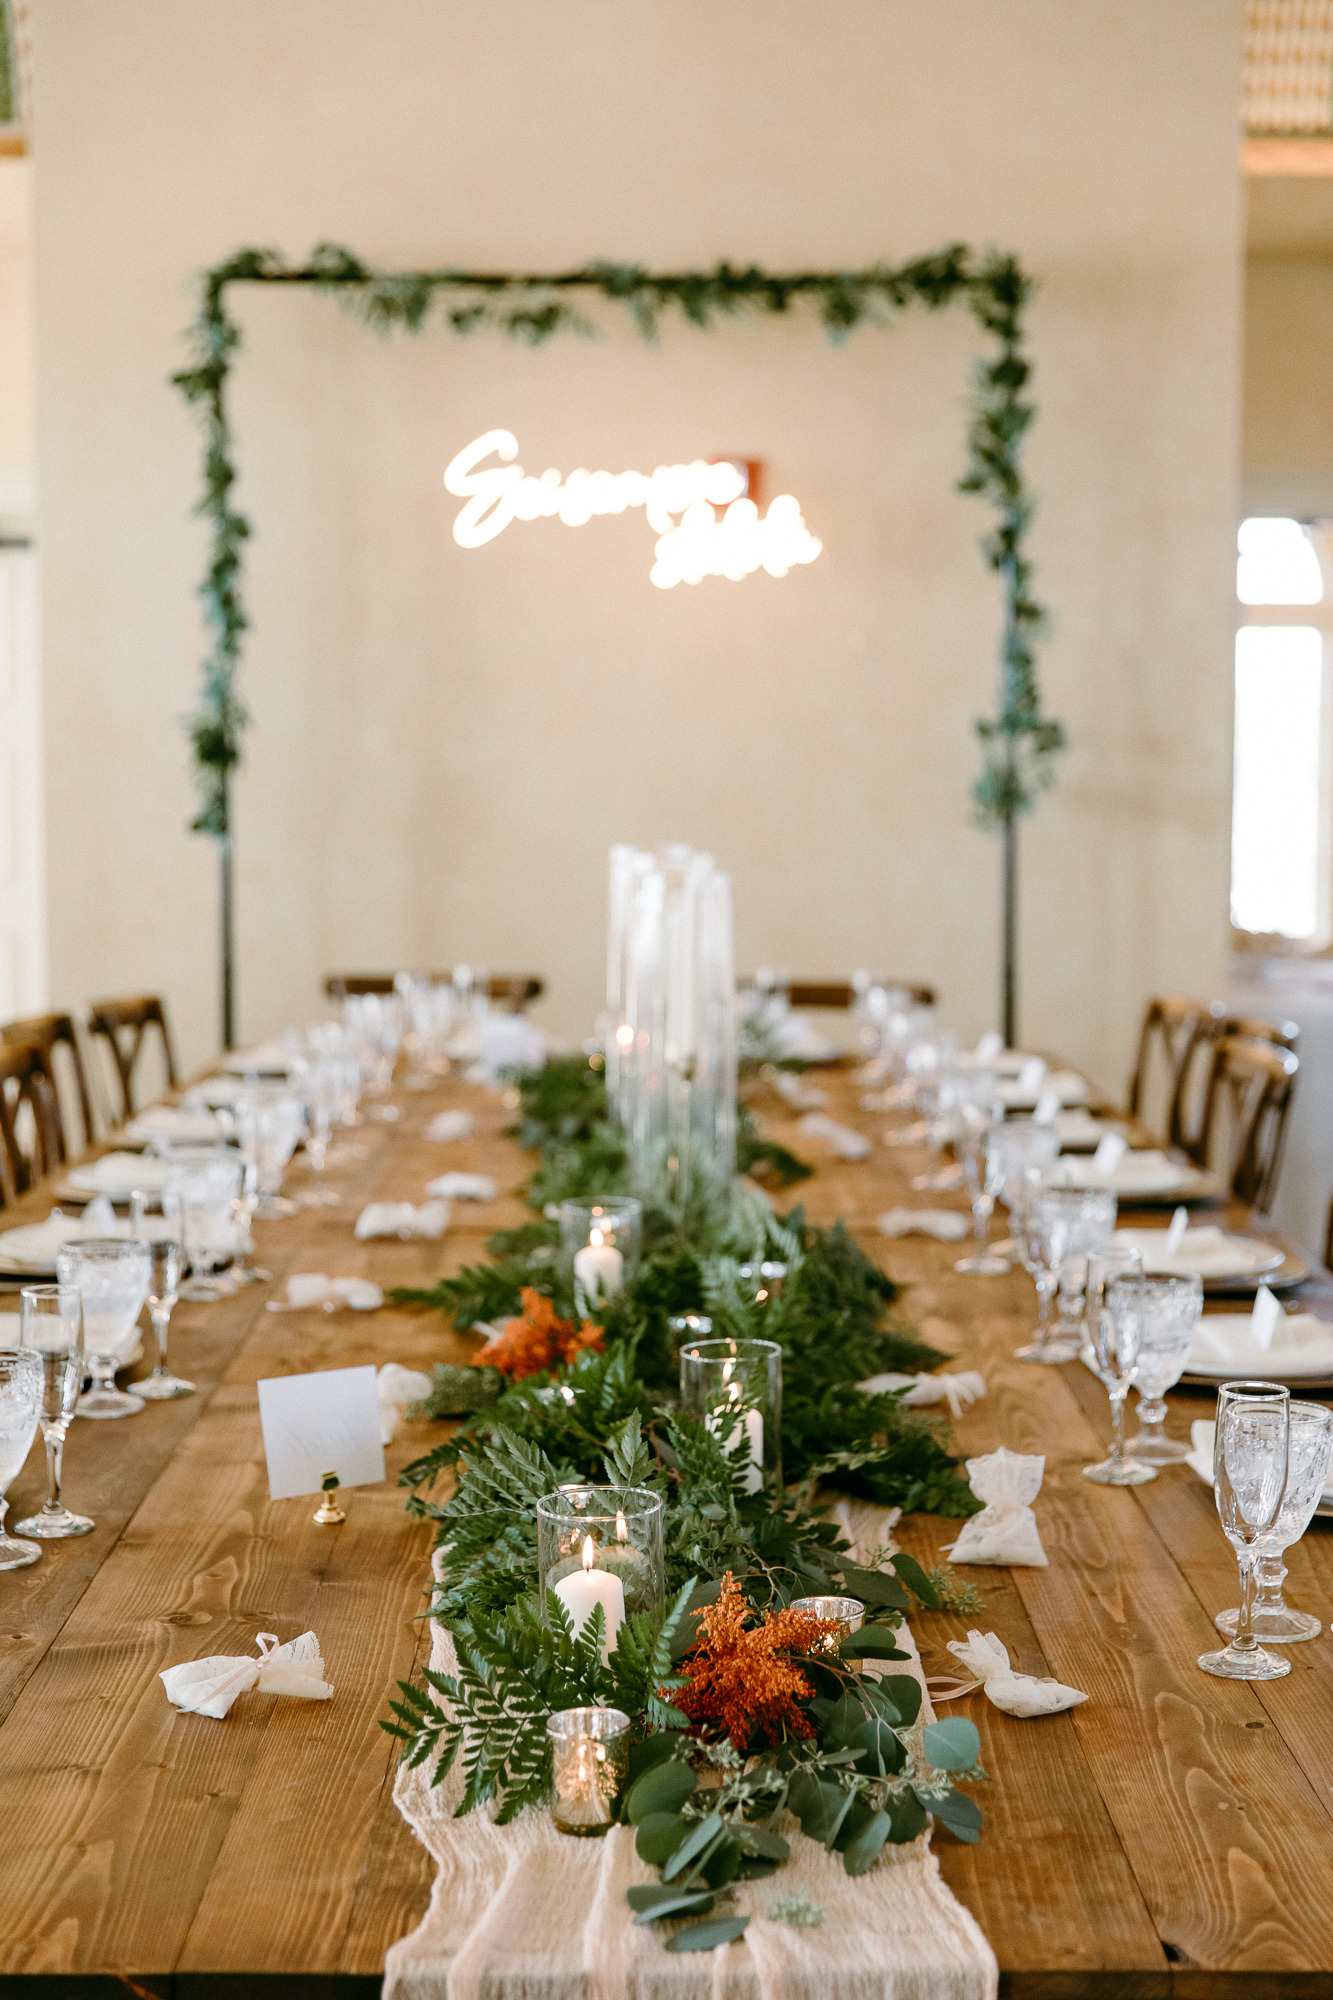 Rustic Italian Elegant Wedding Reception Decor, Ivory Cheesecloth Table Runner, Greenery, Candles, Neon Sign, Rectangular Arch with Greenery, Long Wooden Feasting Table | Tampa Bay Wedding Rentals Outside the Box Rentals